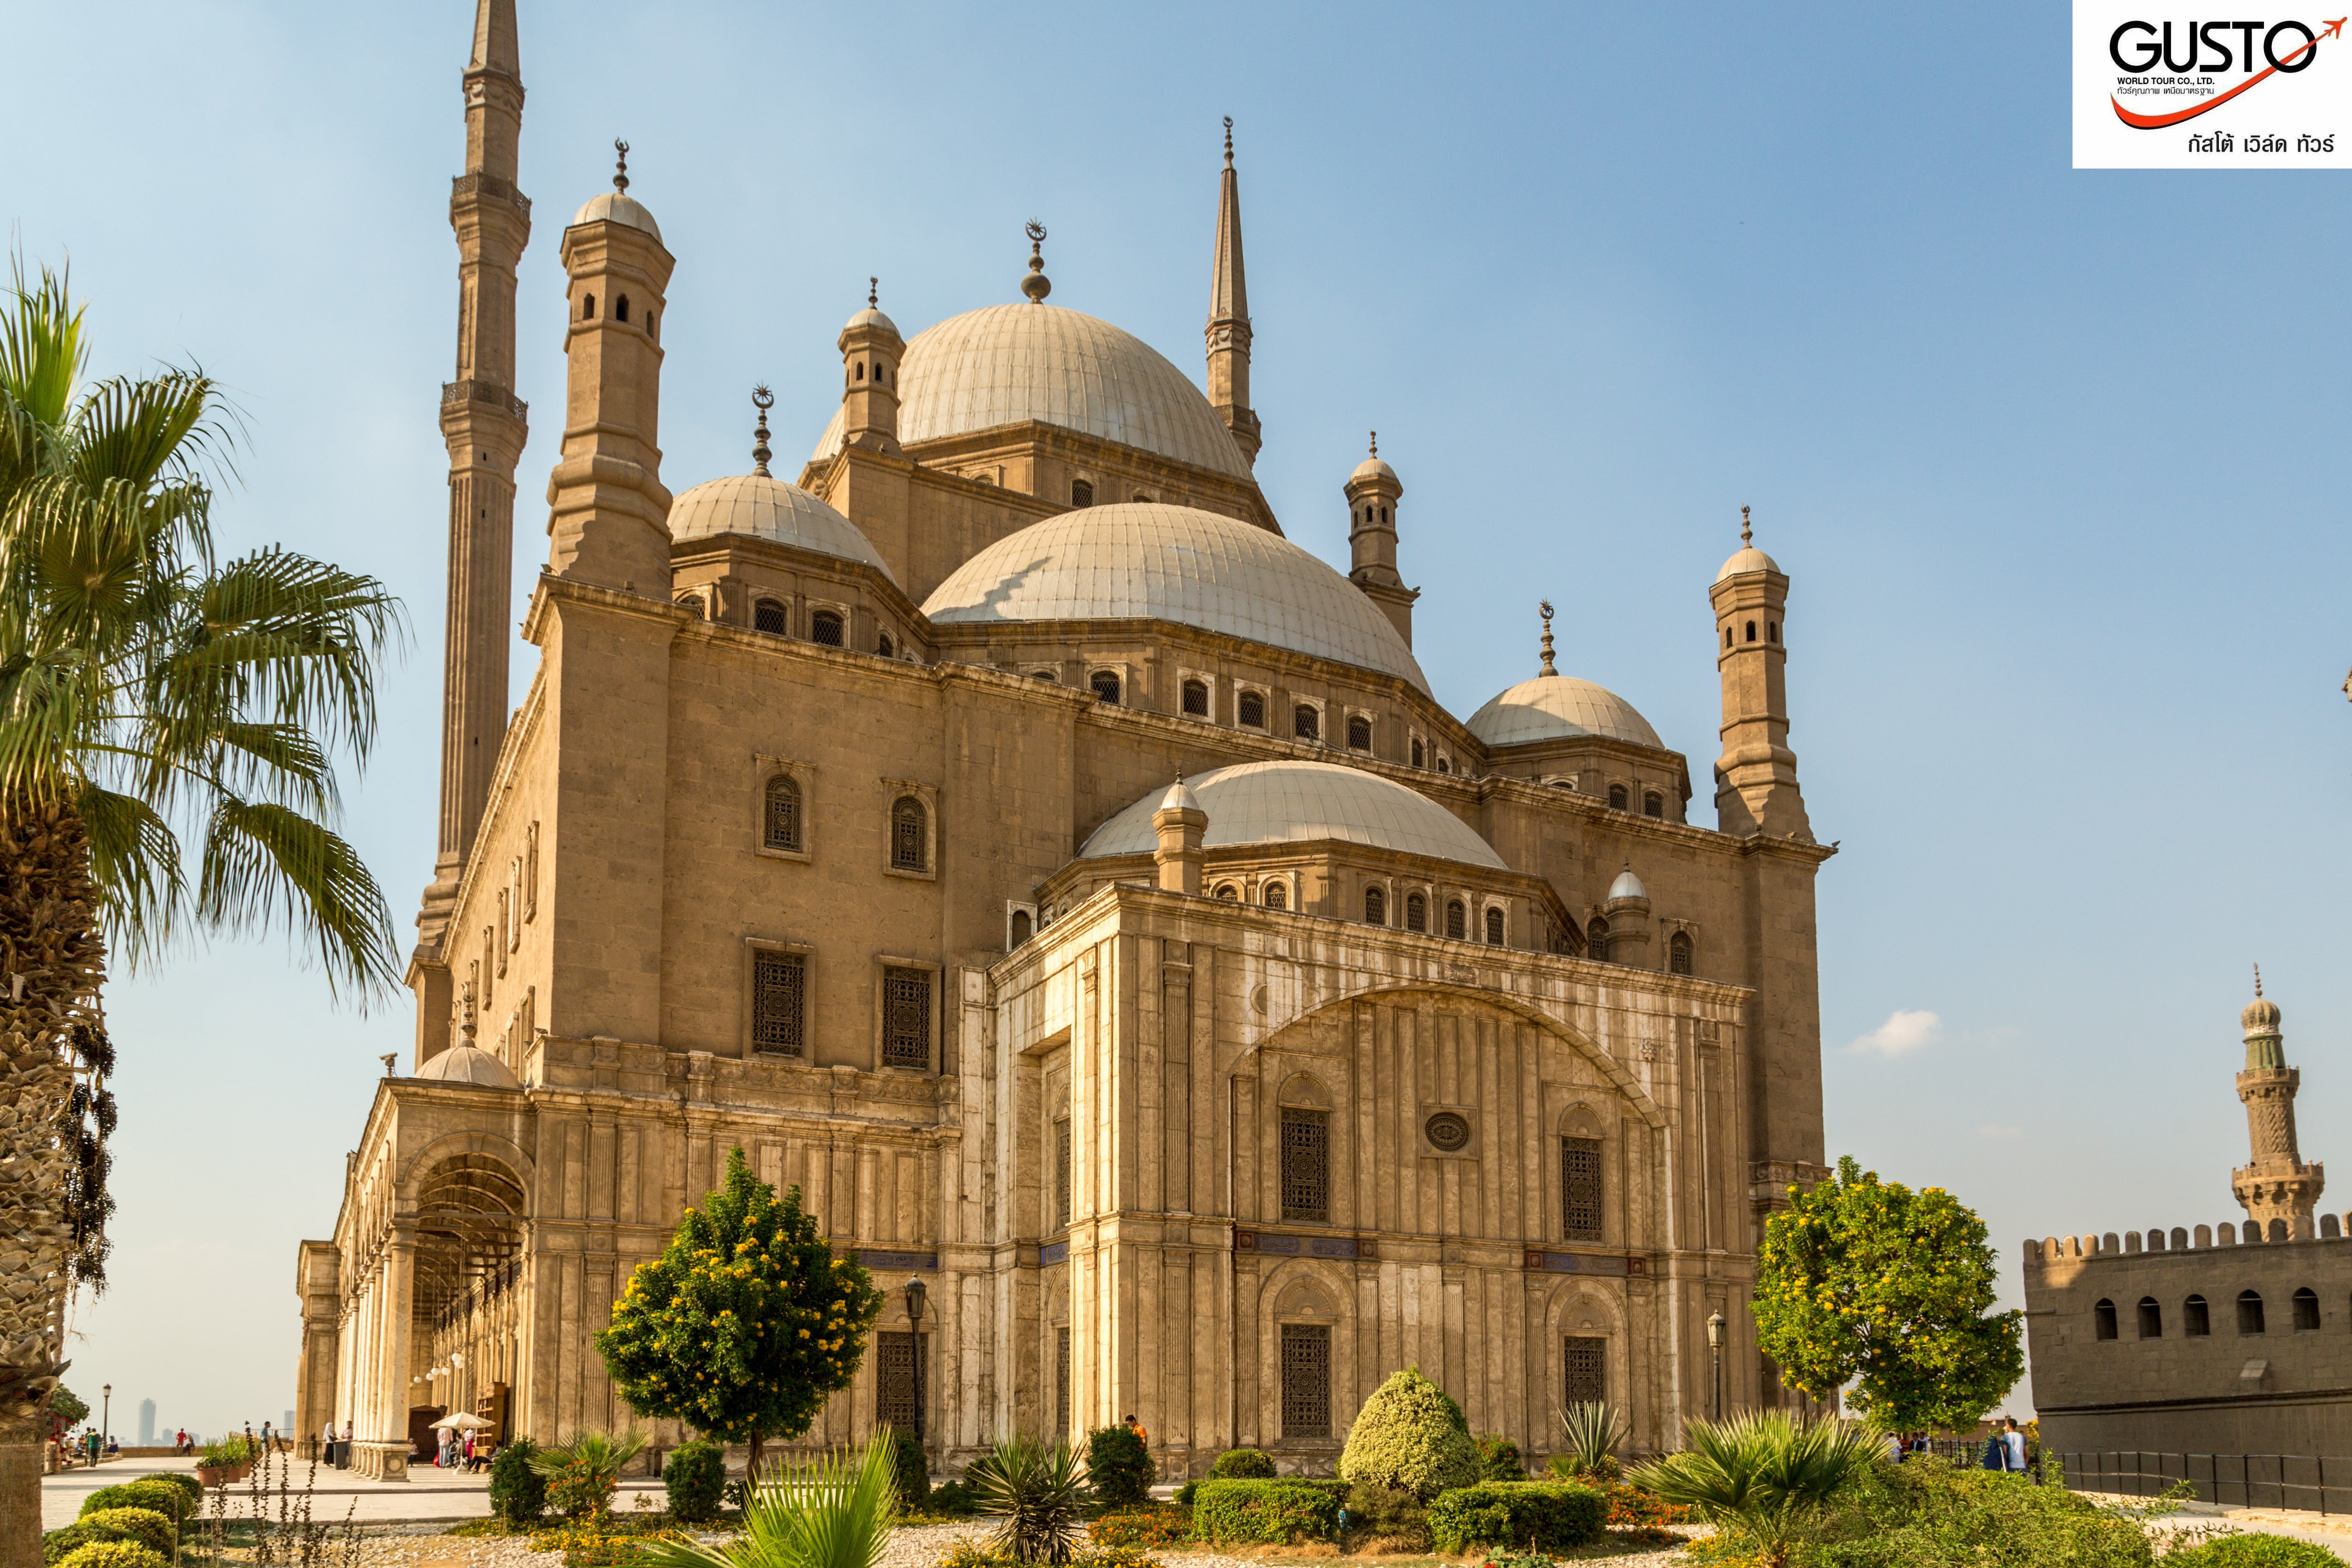 The Saladin Citadel of Cairo, a fortified medieval castle with a mosque and museum serving as one of Egypt's top tourist destinations